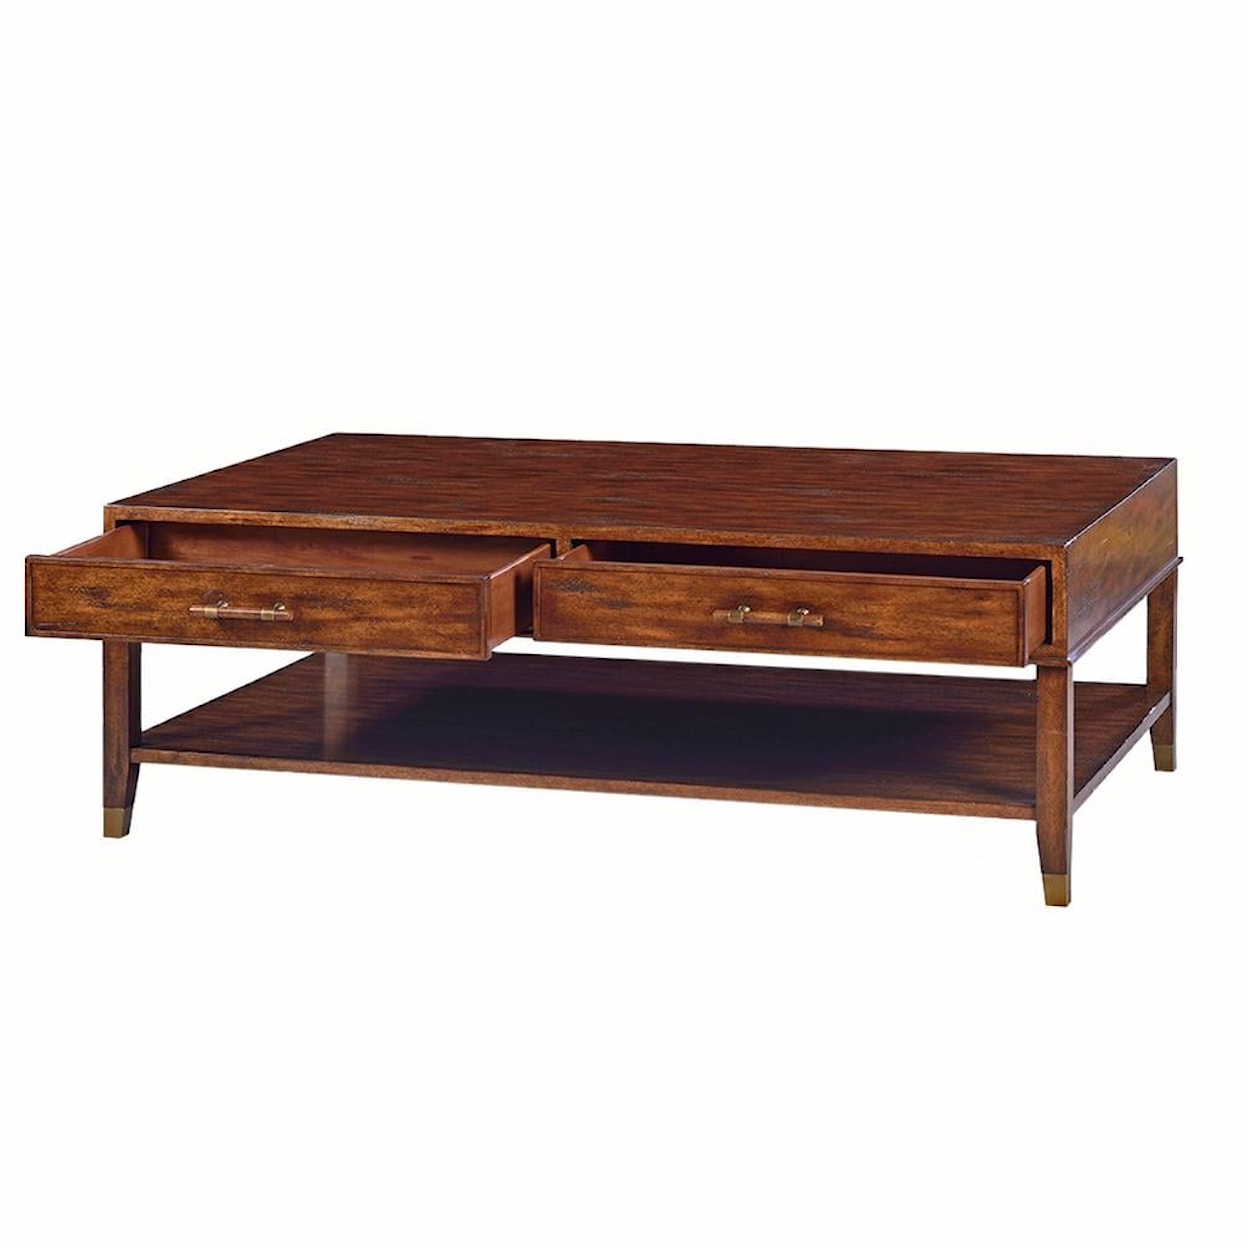 Oliver Home Furnishings Coffee Tables RECTANGULAR COFFEE TABLE- COUNTRY